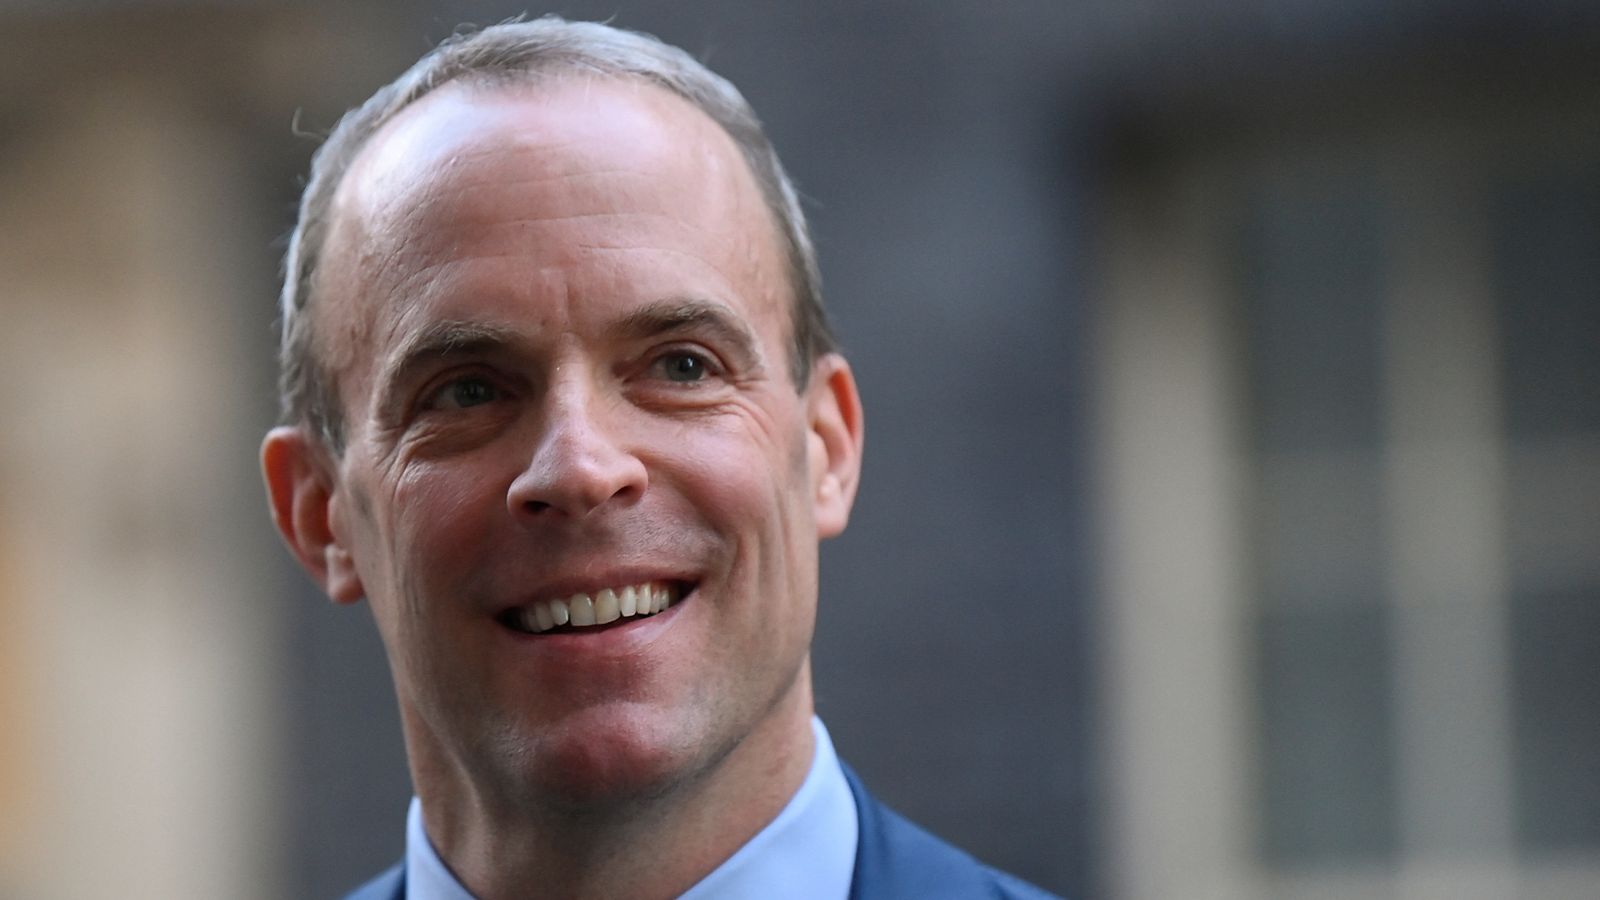 Dominic Raab: Deputy PM says he has 'behaved professionally at all times' and denies breaking ministerial code after bullying allegations